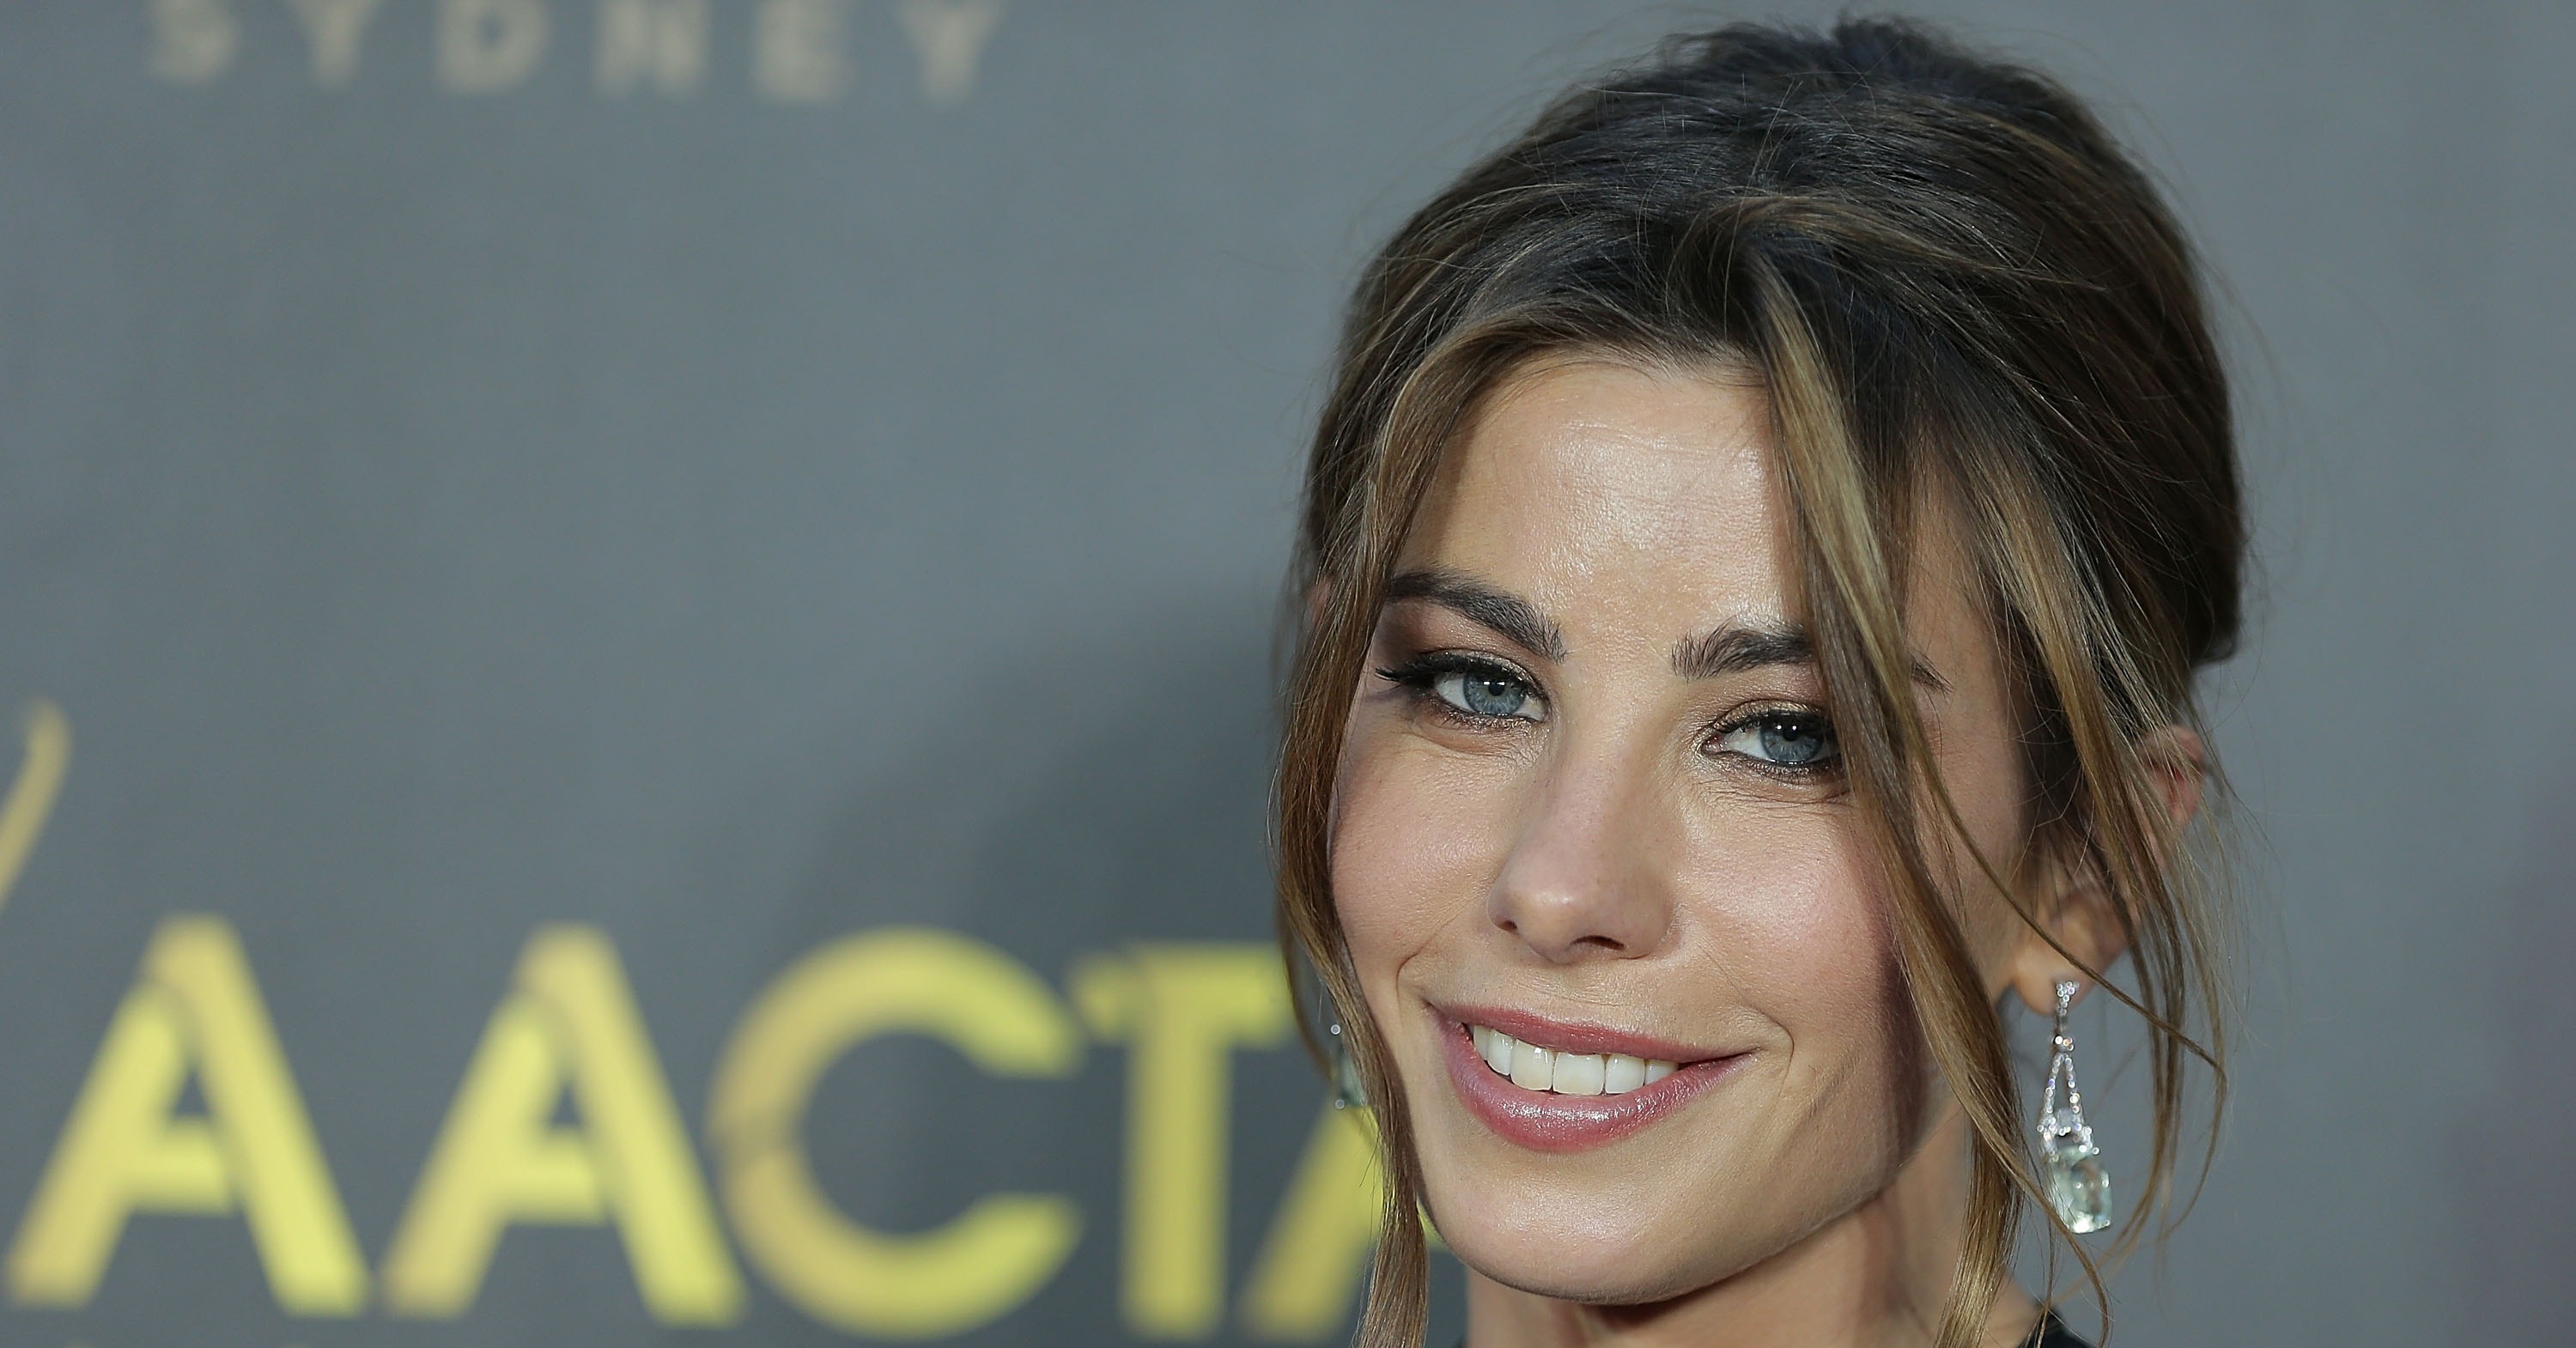 Brooke Satchwell | Ready For Their Close-Ups: All the Glamorous Beauty ...